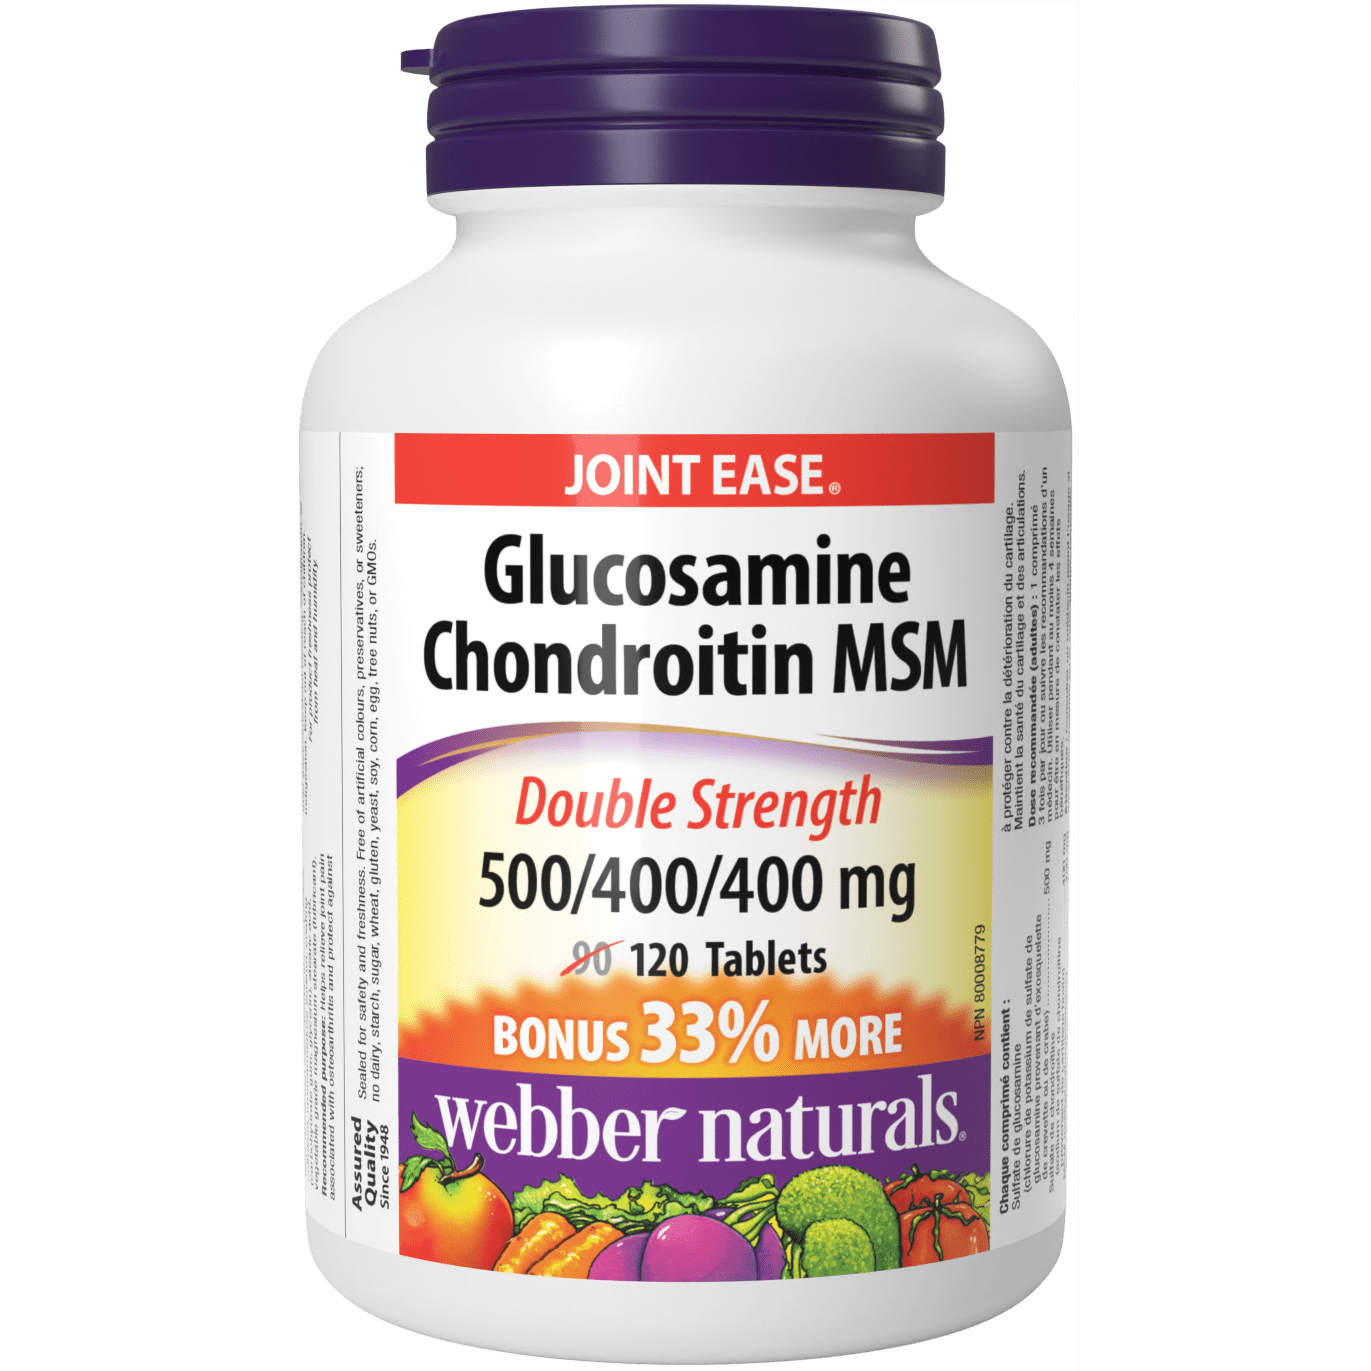 Glucosamine Chondroitin MSM Double Strength 500/400/400 mg for Webber Naturals|v|hi-res|WN3835